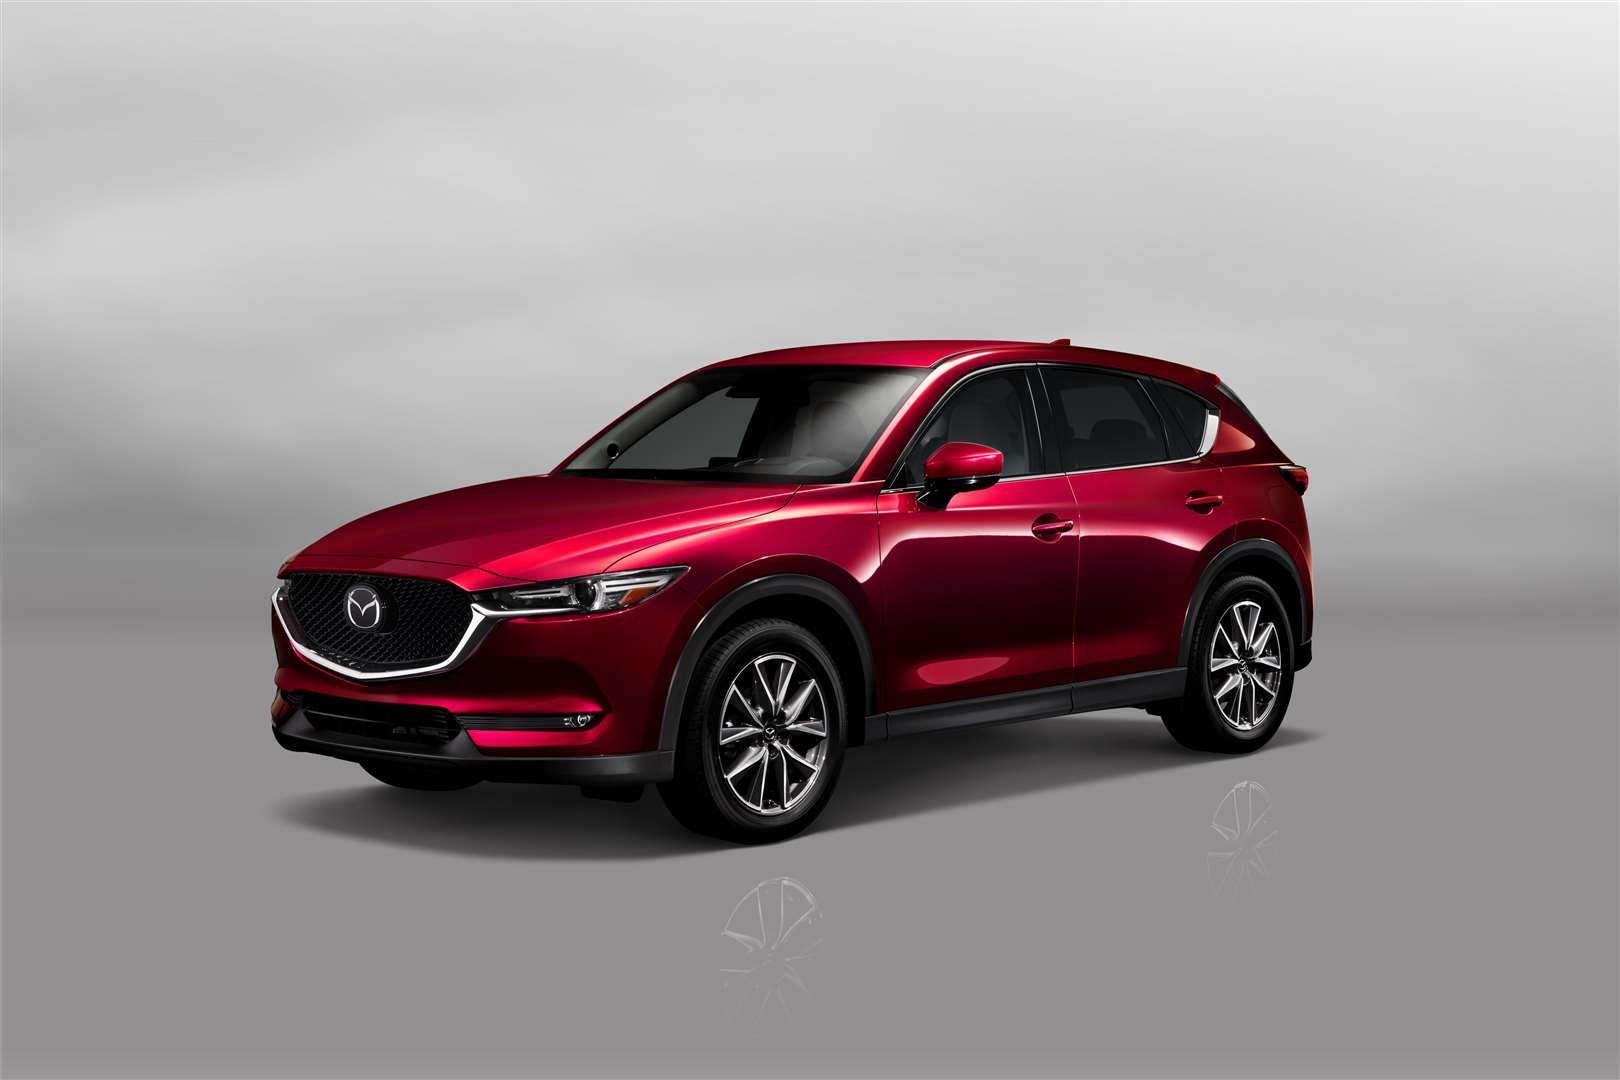 The new CX-5 is stylish and beautifully built